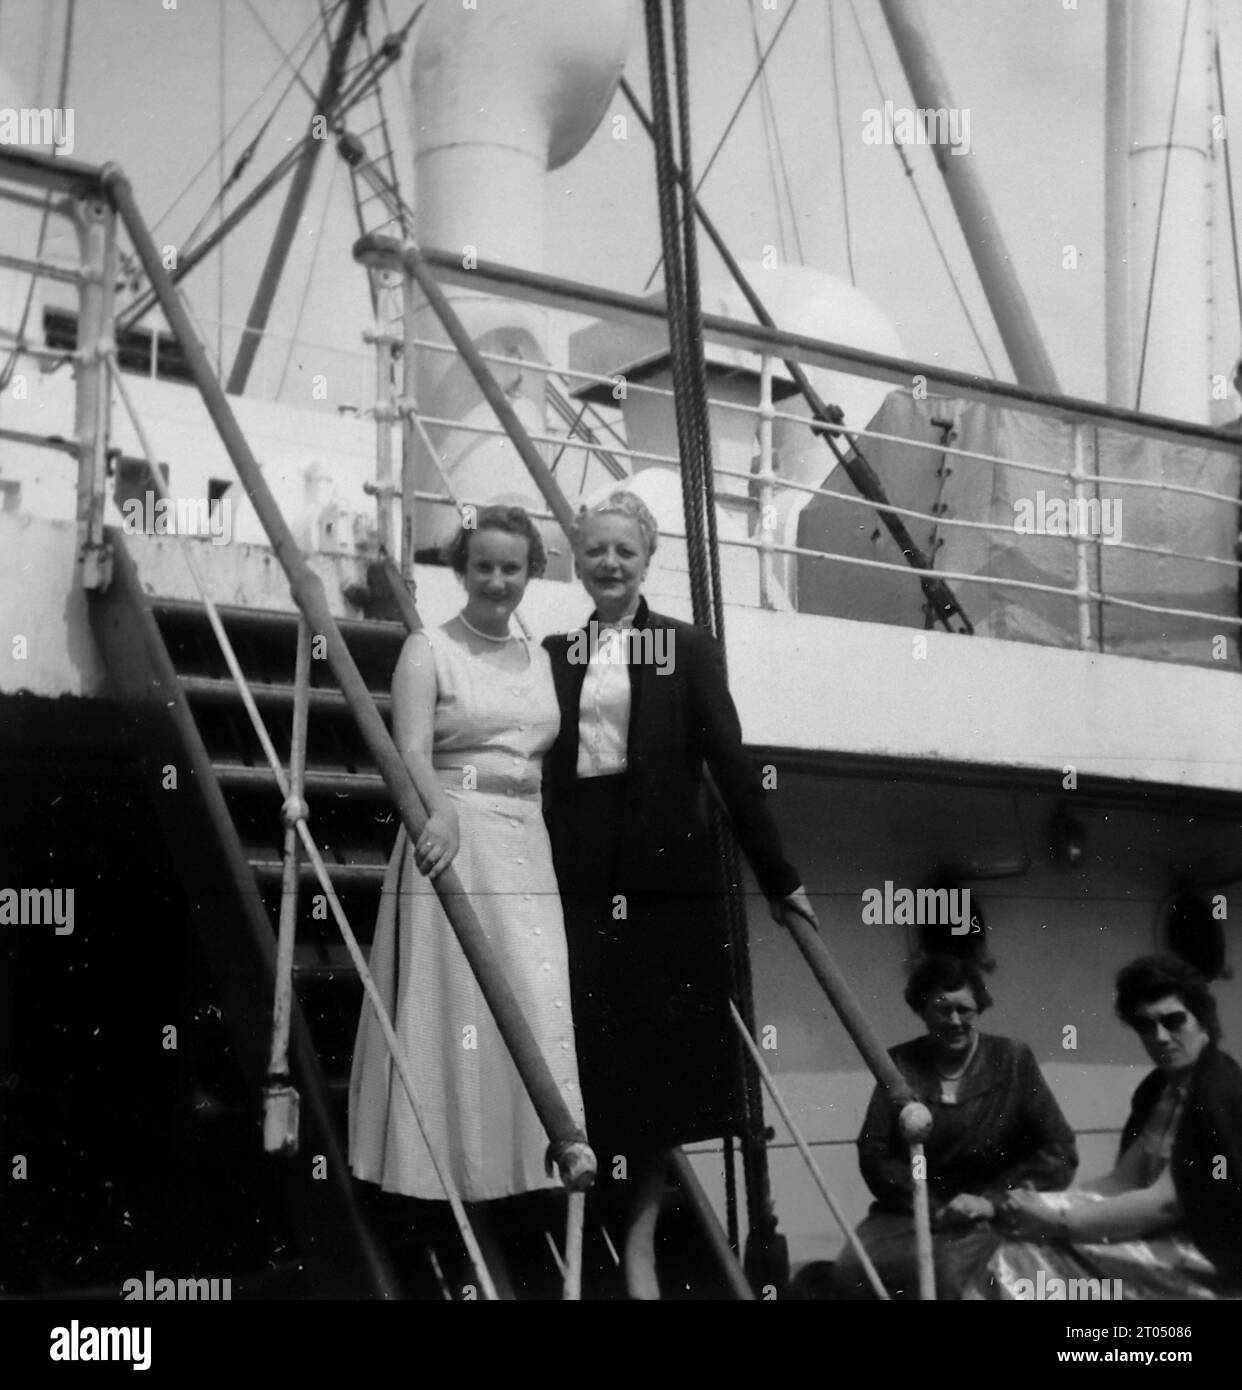 Passengers descending a stairway upon arrival in New York. This photograph is from an unattributed personal album of photographs of a cruise to New York dated 29th June to 13th August 1956. Sailing from Liverpool aboard the Cunard vessel M.V. Britannic and returning from New York to Southampton aboard the Cunard vessel R.M.S. Queen Mary. Average size of the original photographs was 4x3 inches. Stock Photo